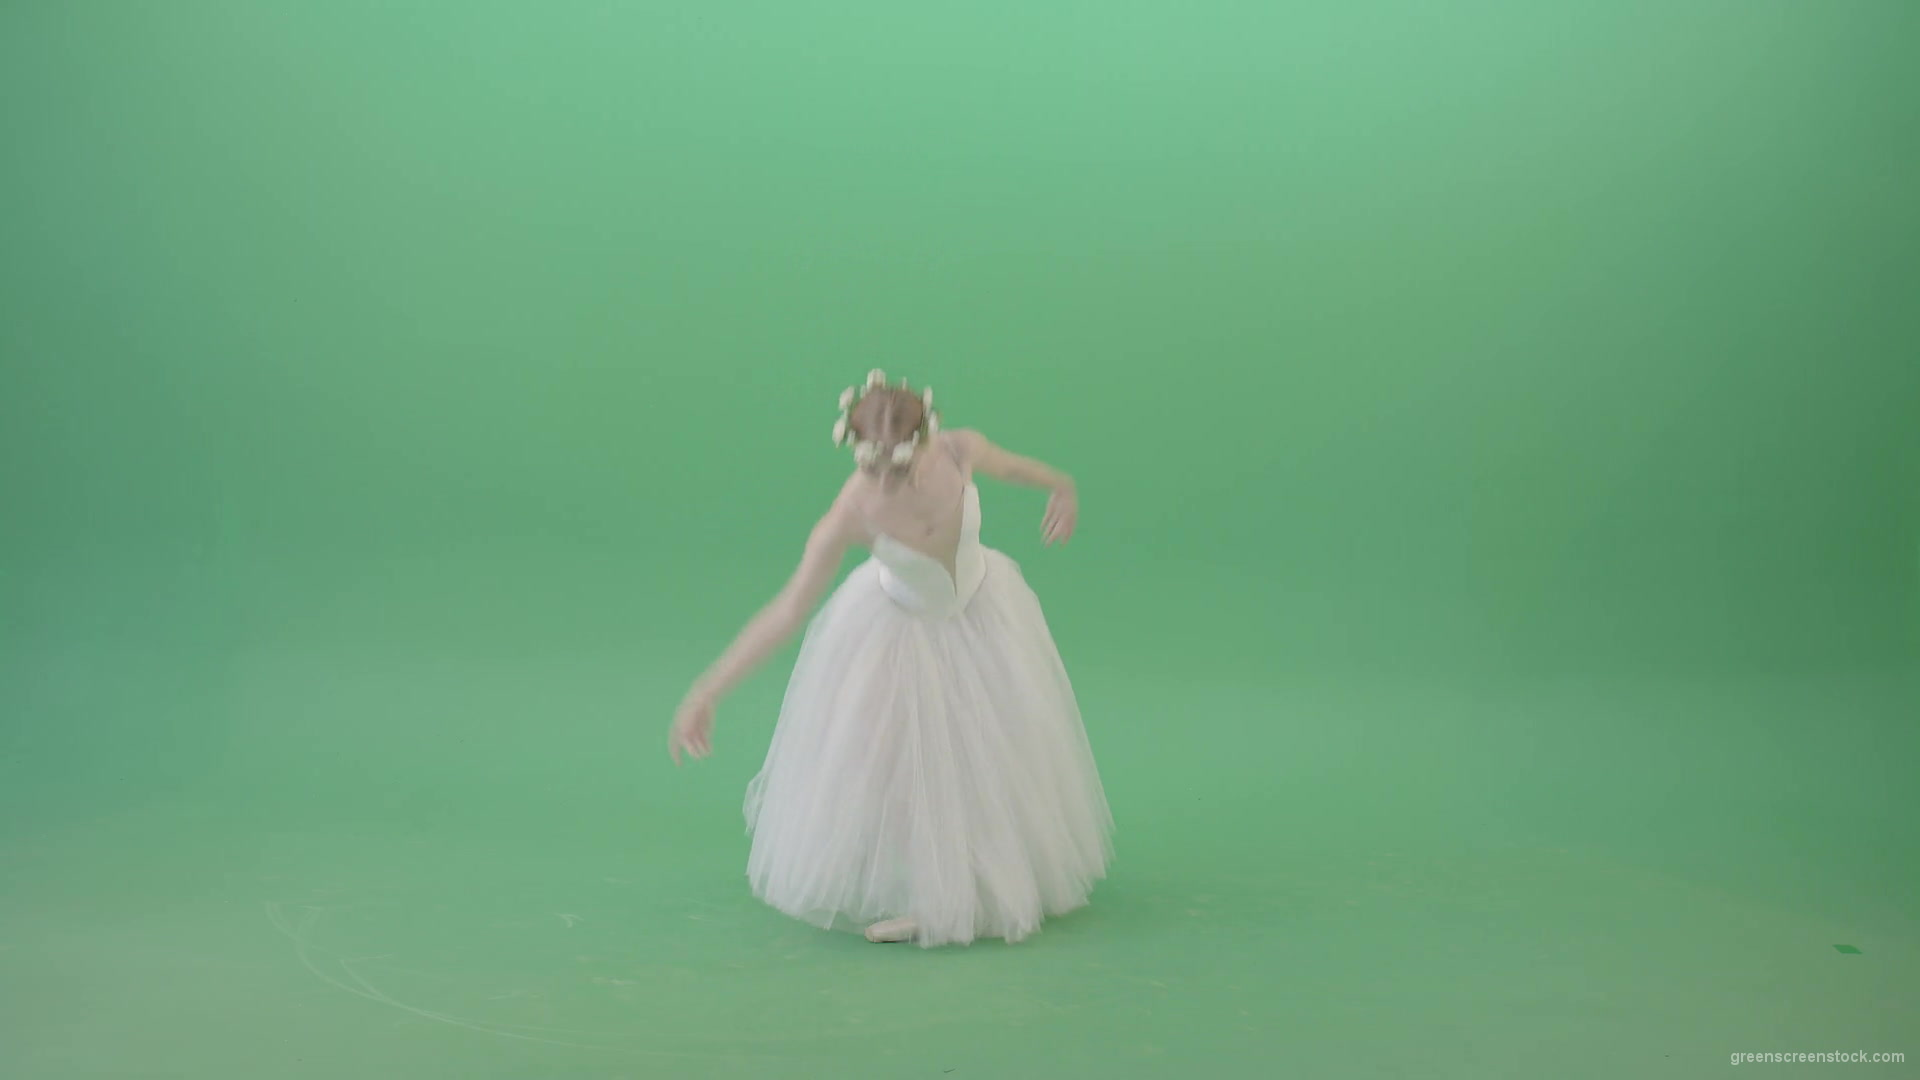 Ballet-Art-Princes-making-royal-regards-in-white-wedding-dress-isolated-on-green-screen-4K-Video-Footage-1920_005 Green Screen Stock